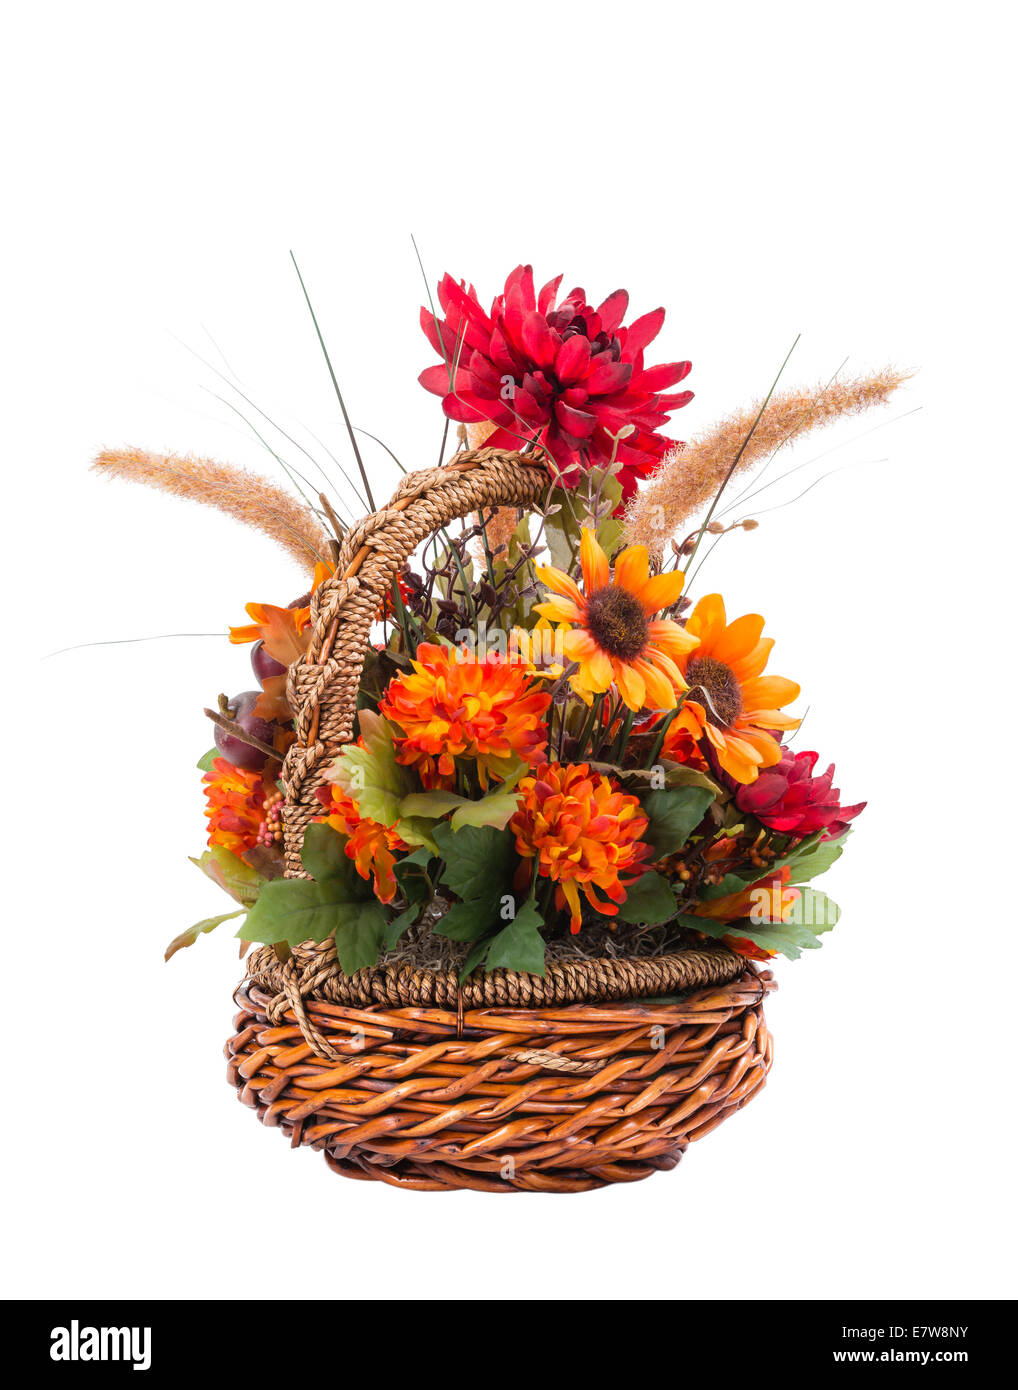 Autumn flower arrangement in a basket isolated on white Stock Photo